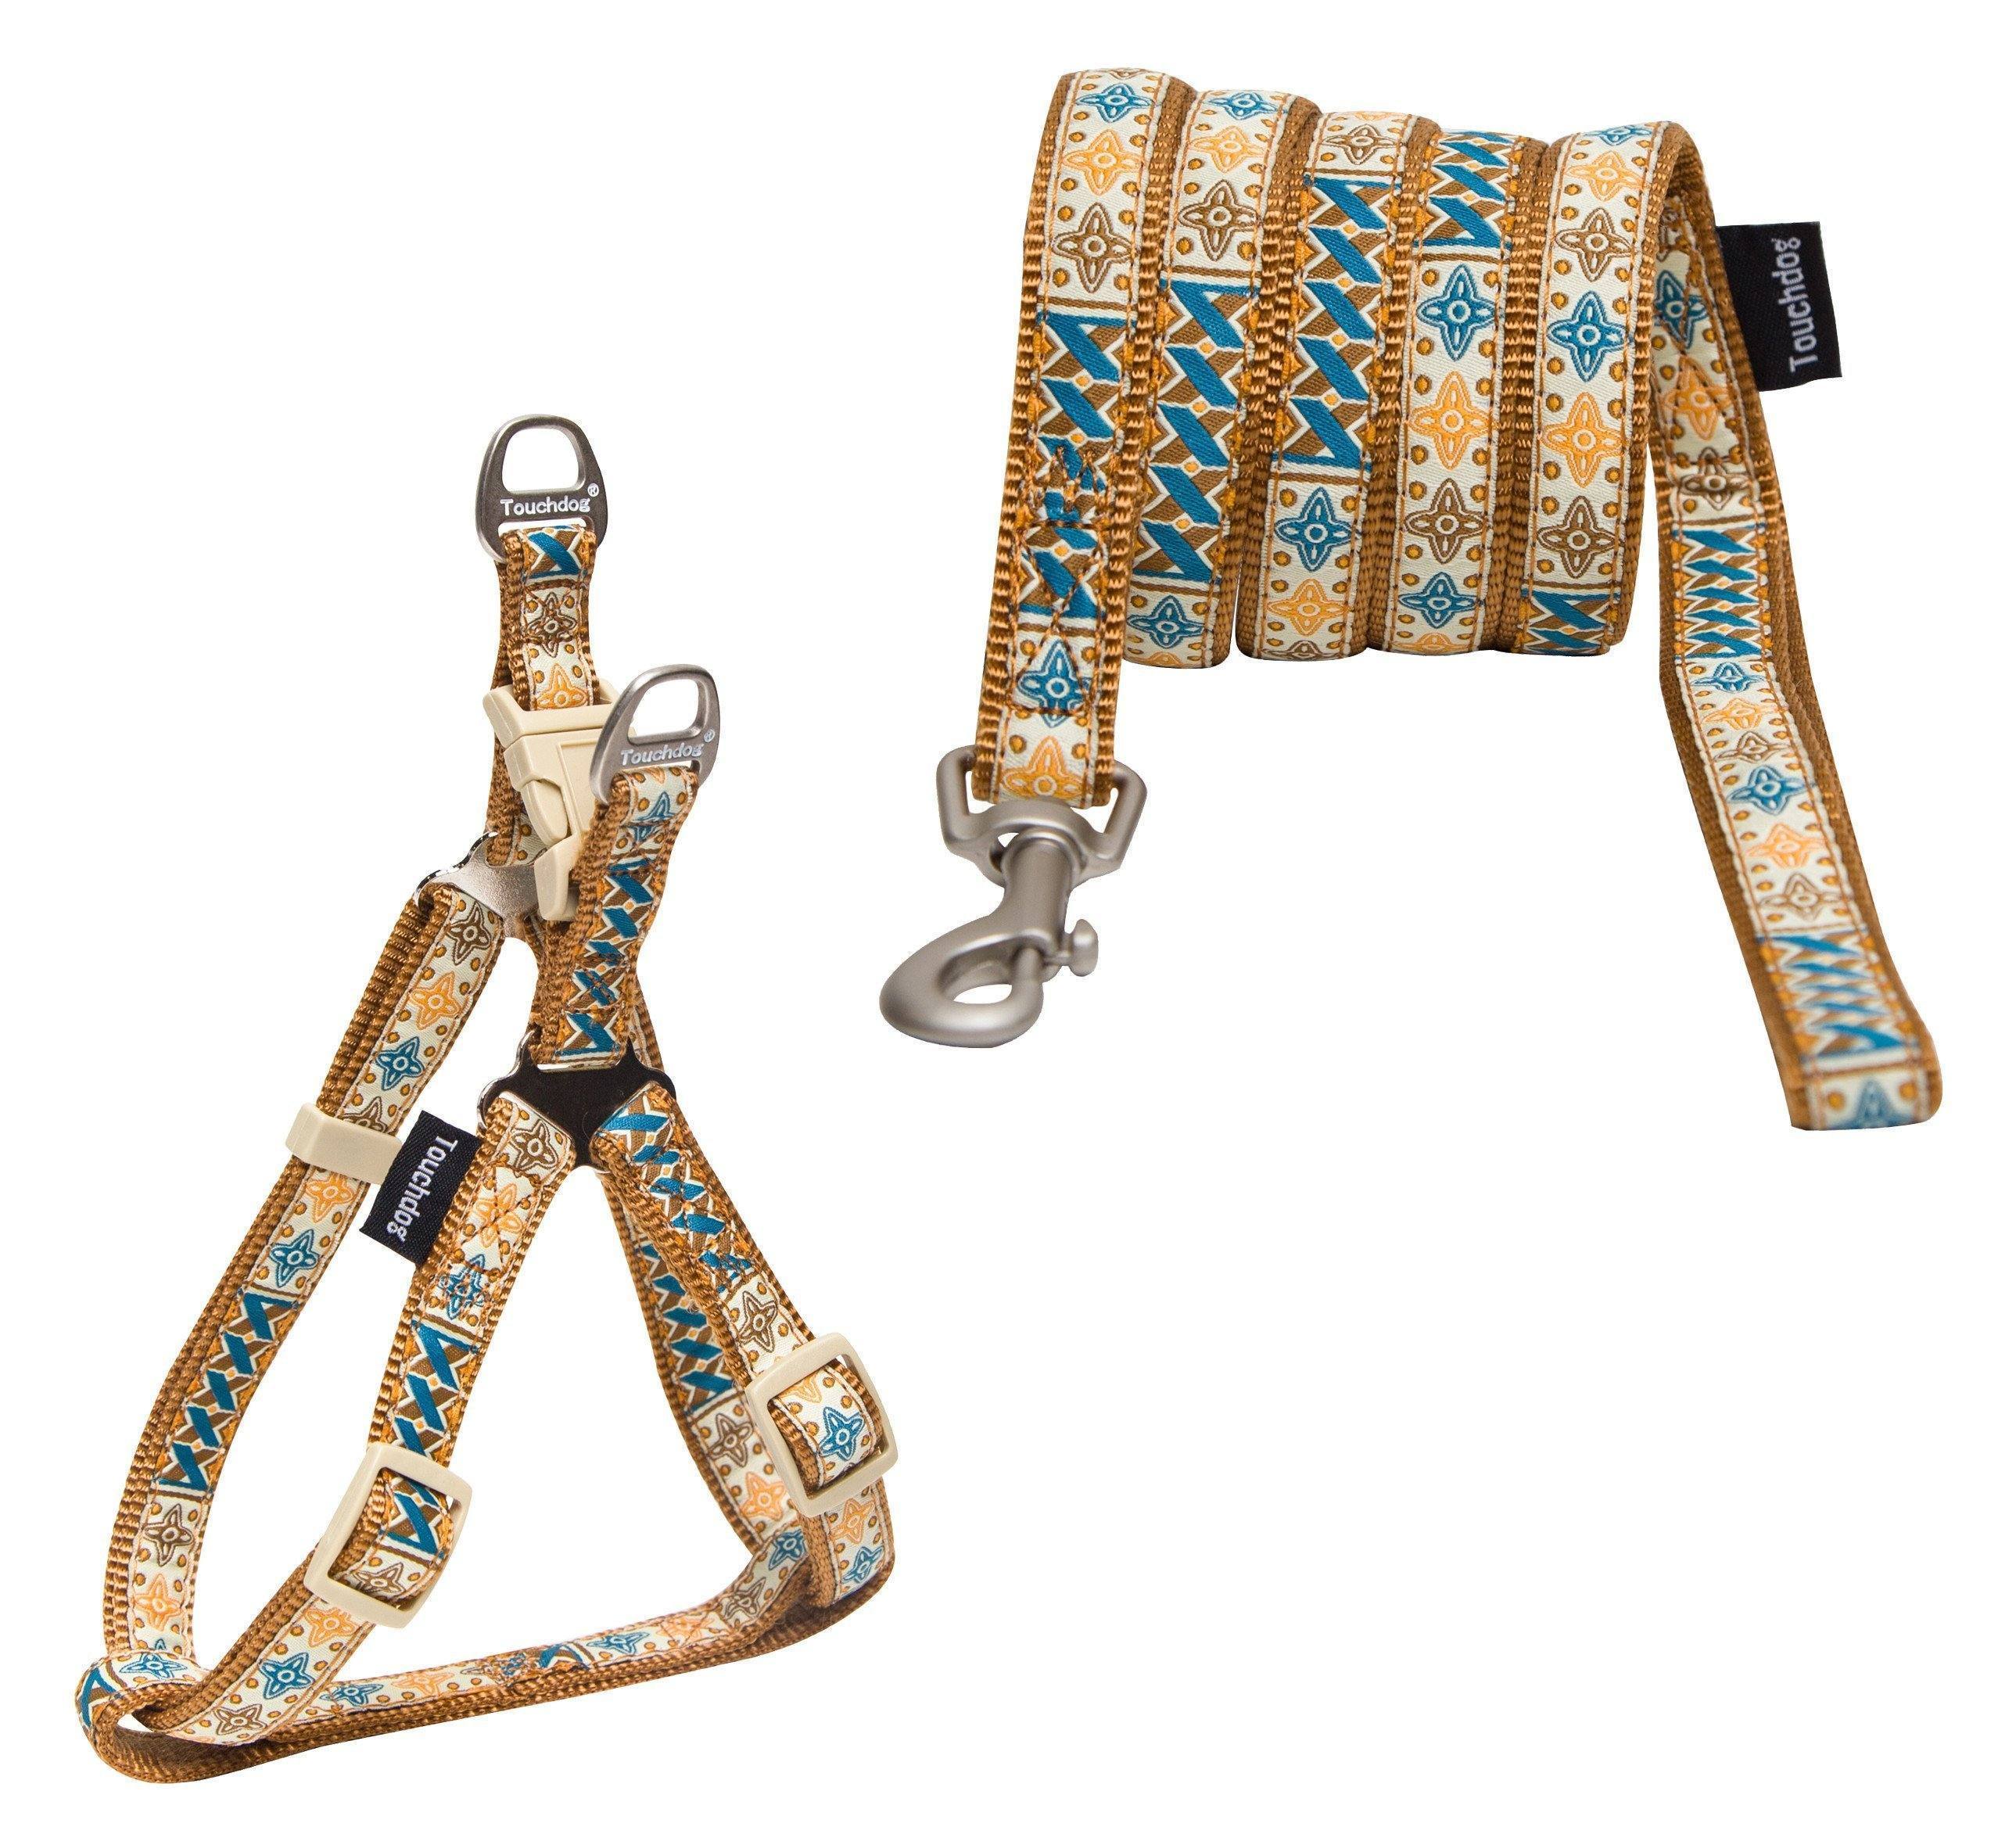 Touchdog ® 'Caliber' Embroidered Designer Fashion Pet Dog Leash and Harness Combination Small Brown Pattern